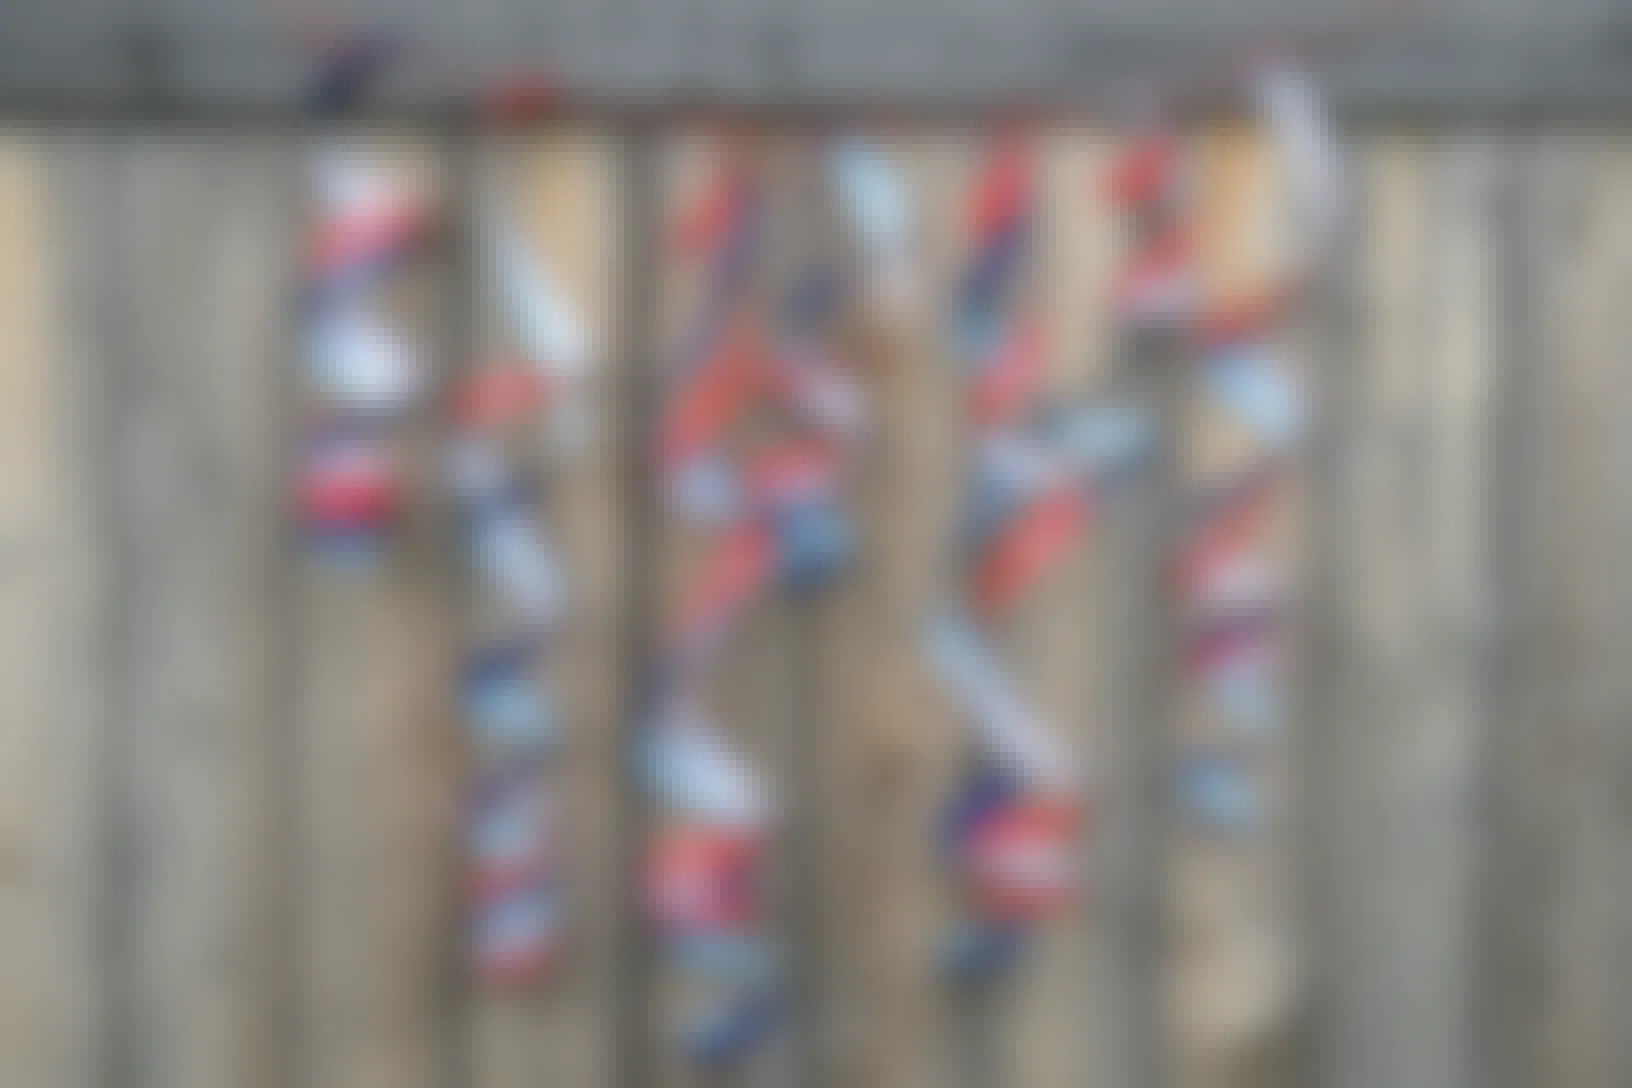 Twirly streamers hung together as a banner made from spiral-cut red and blue plastic cups, hanging on a wooden fence.